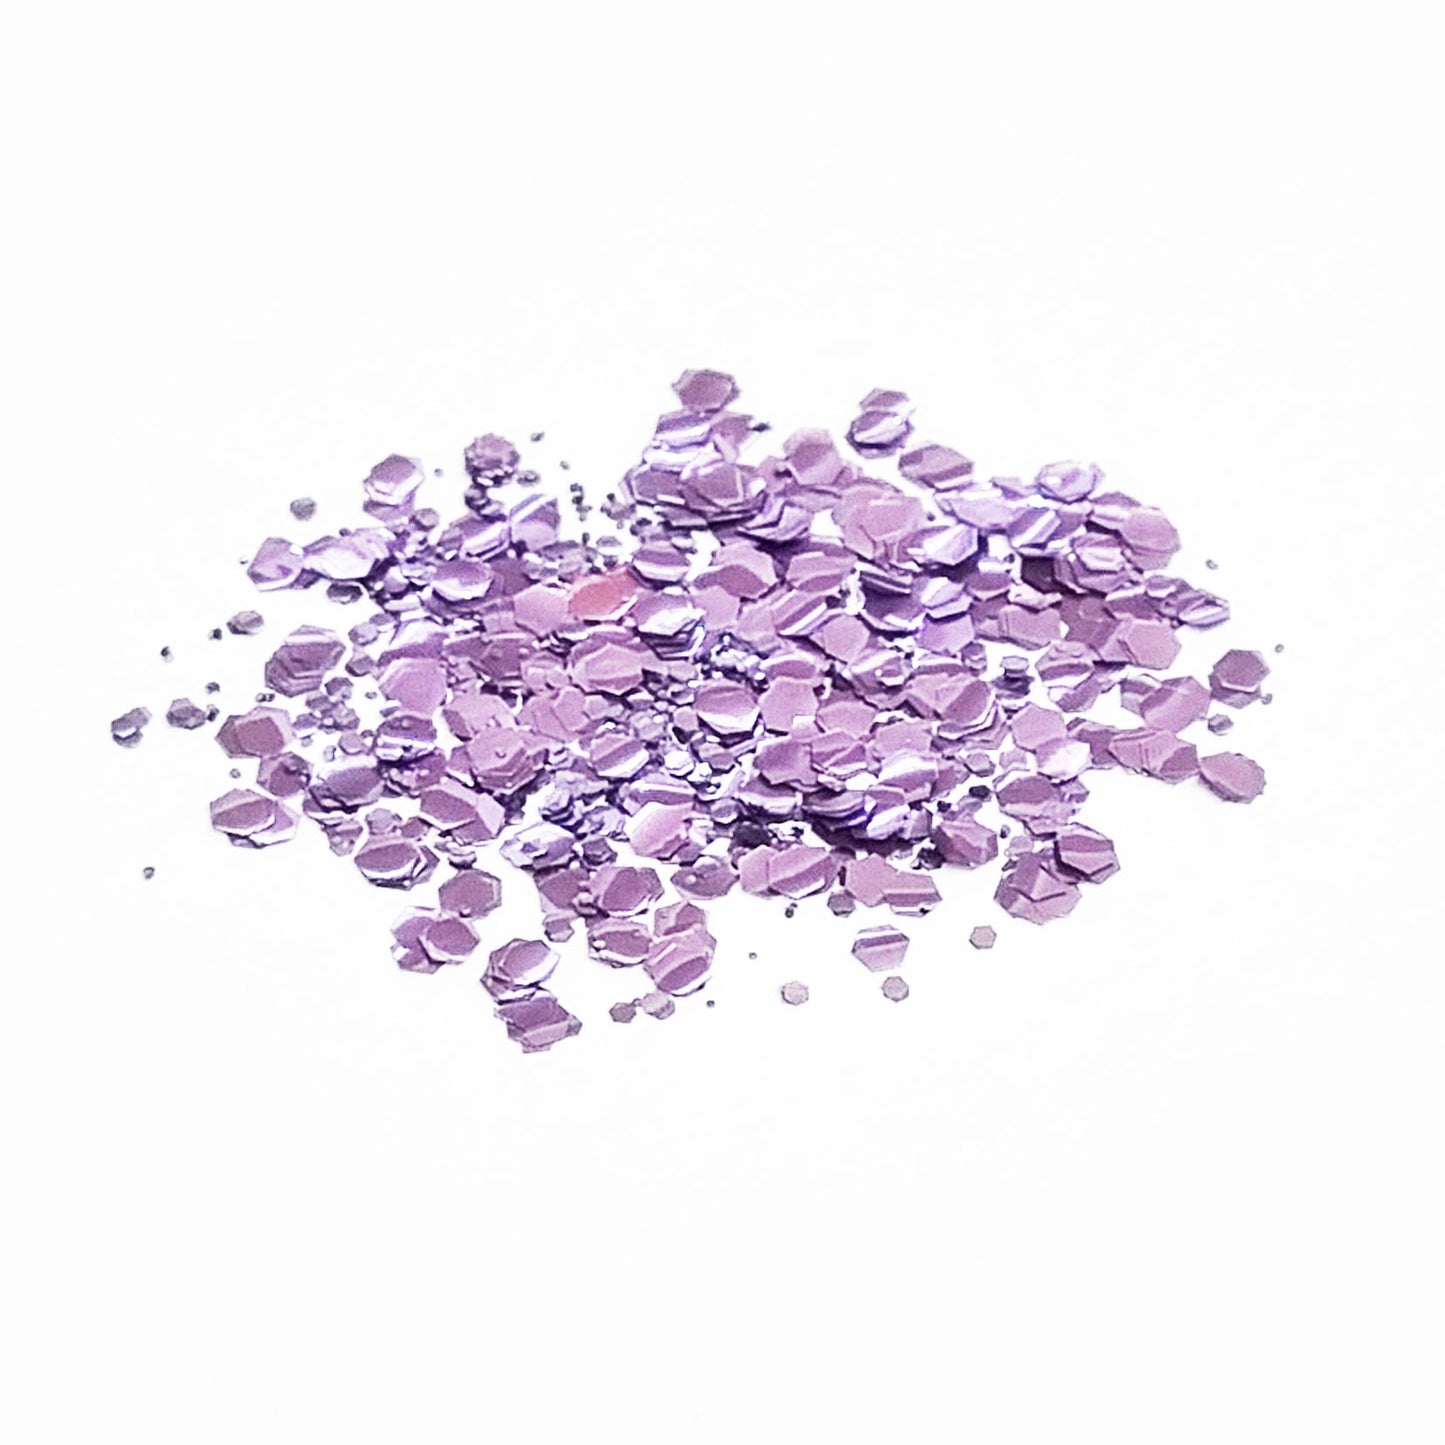 Violet Biodegradable Cosmetic Glitter | Mix | Truly Personal | Wax Melt Bath Bombs Soap